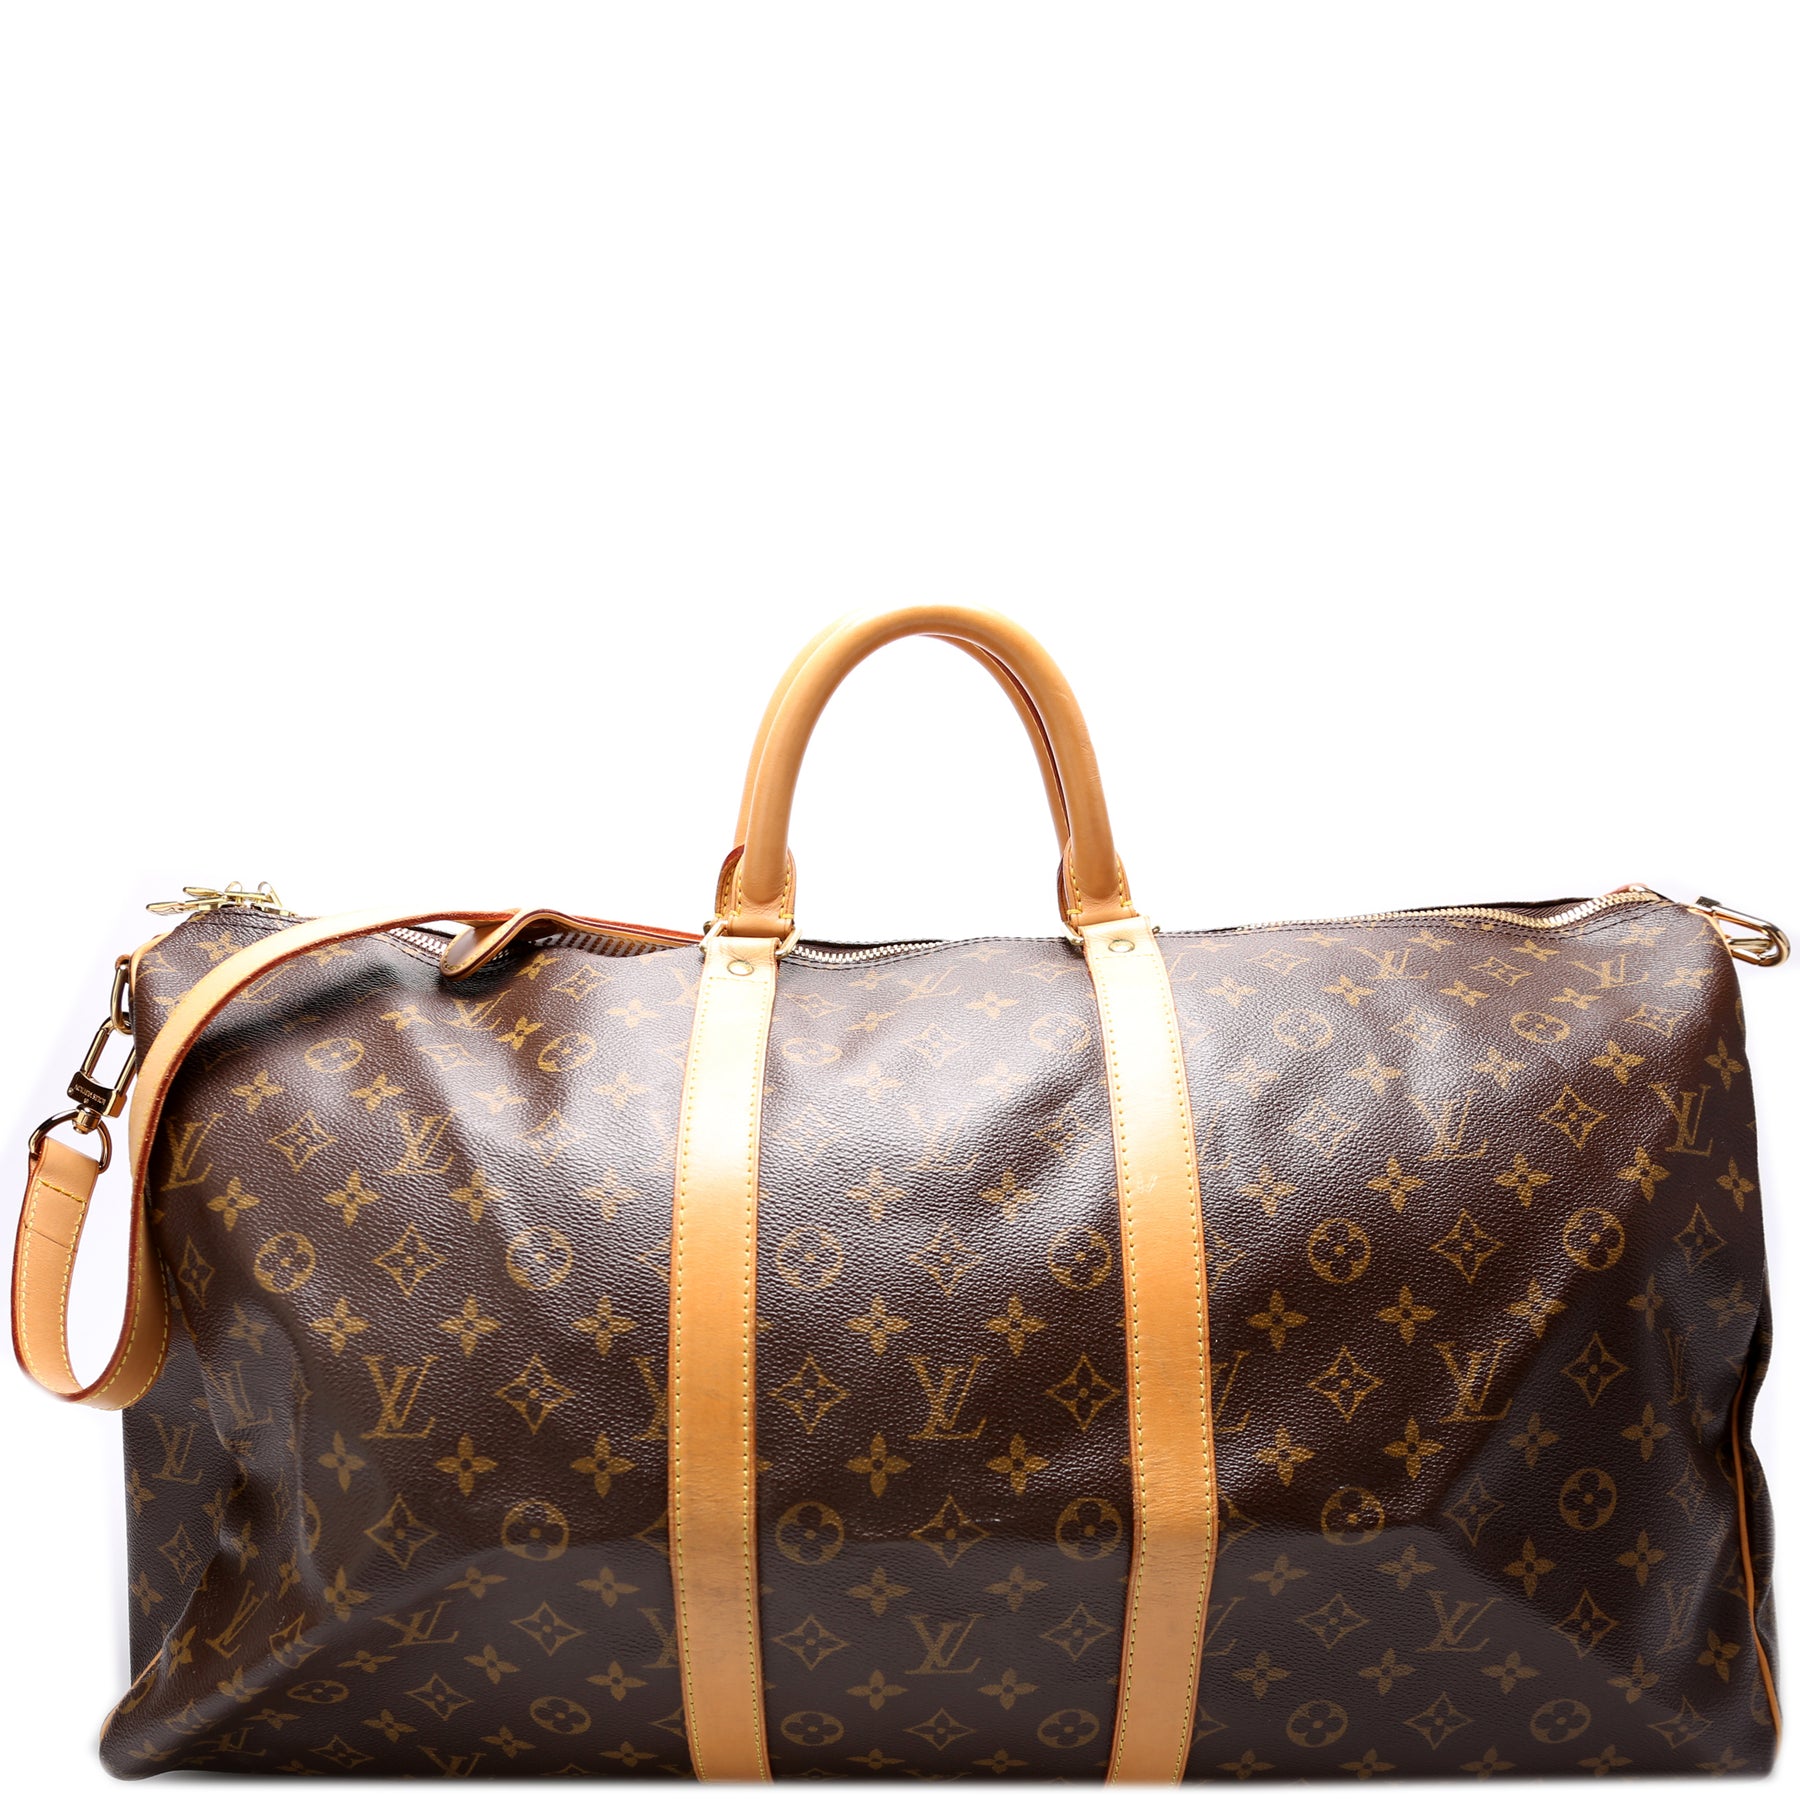 LOUIS VUITTON Keepall Bandouliere 55 Monogram without strap PRICE